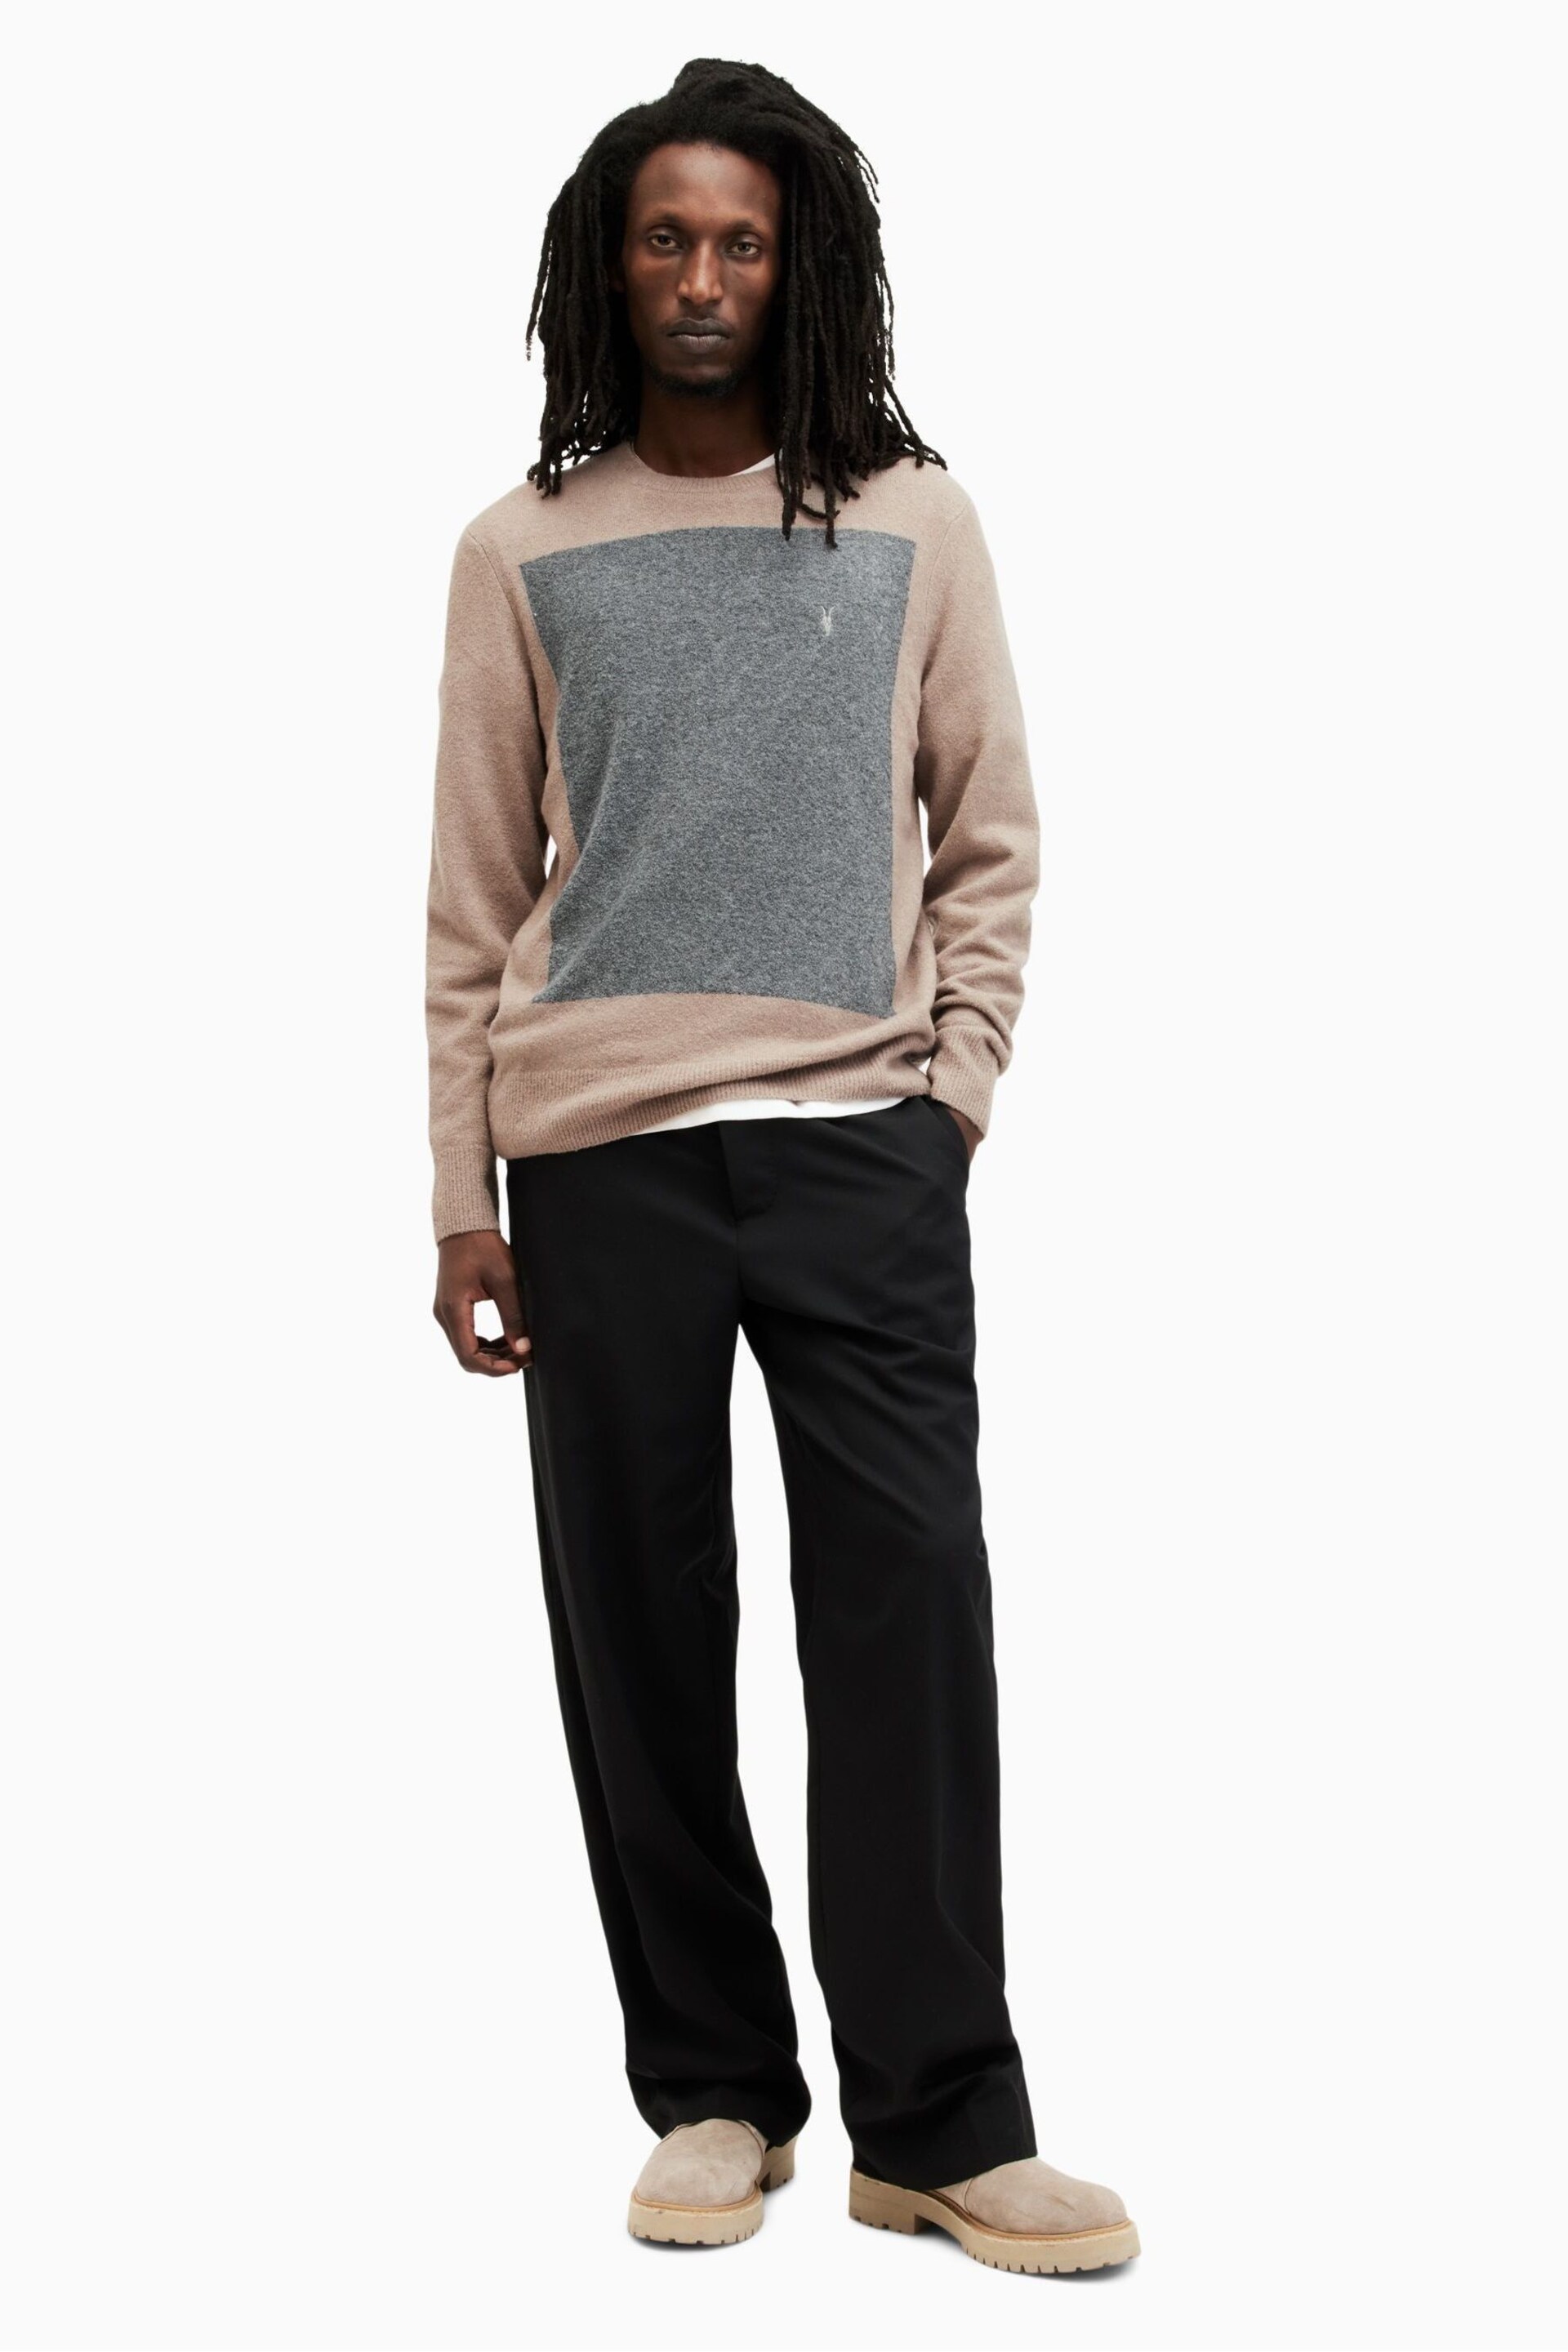 AllSaints Natural Lobke Knit Crew Sweater - Image 3 of 4